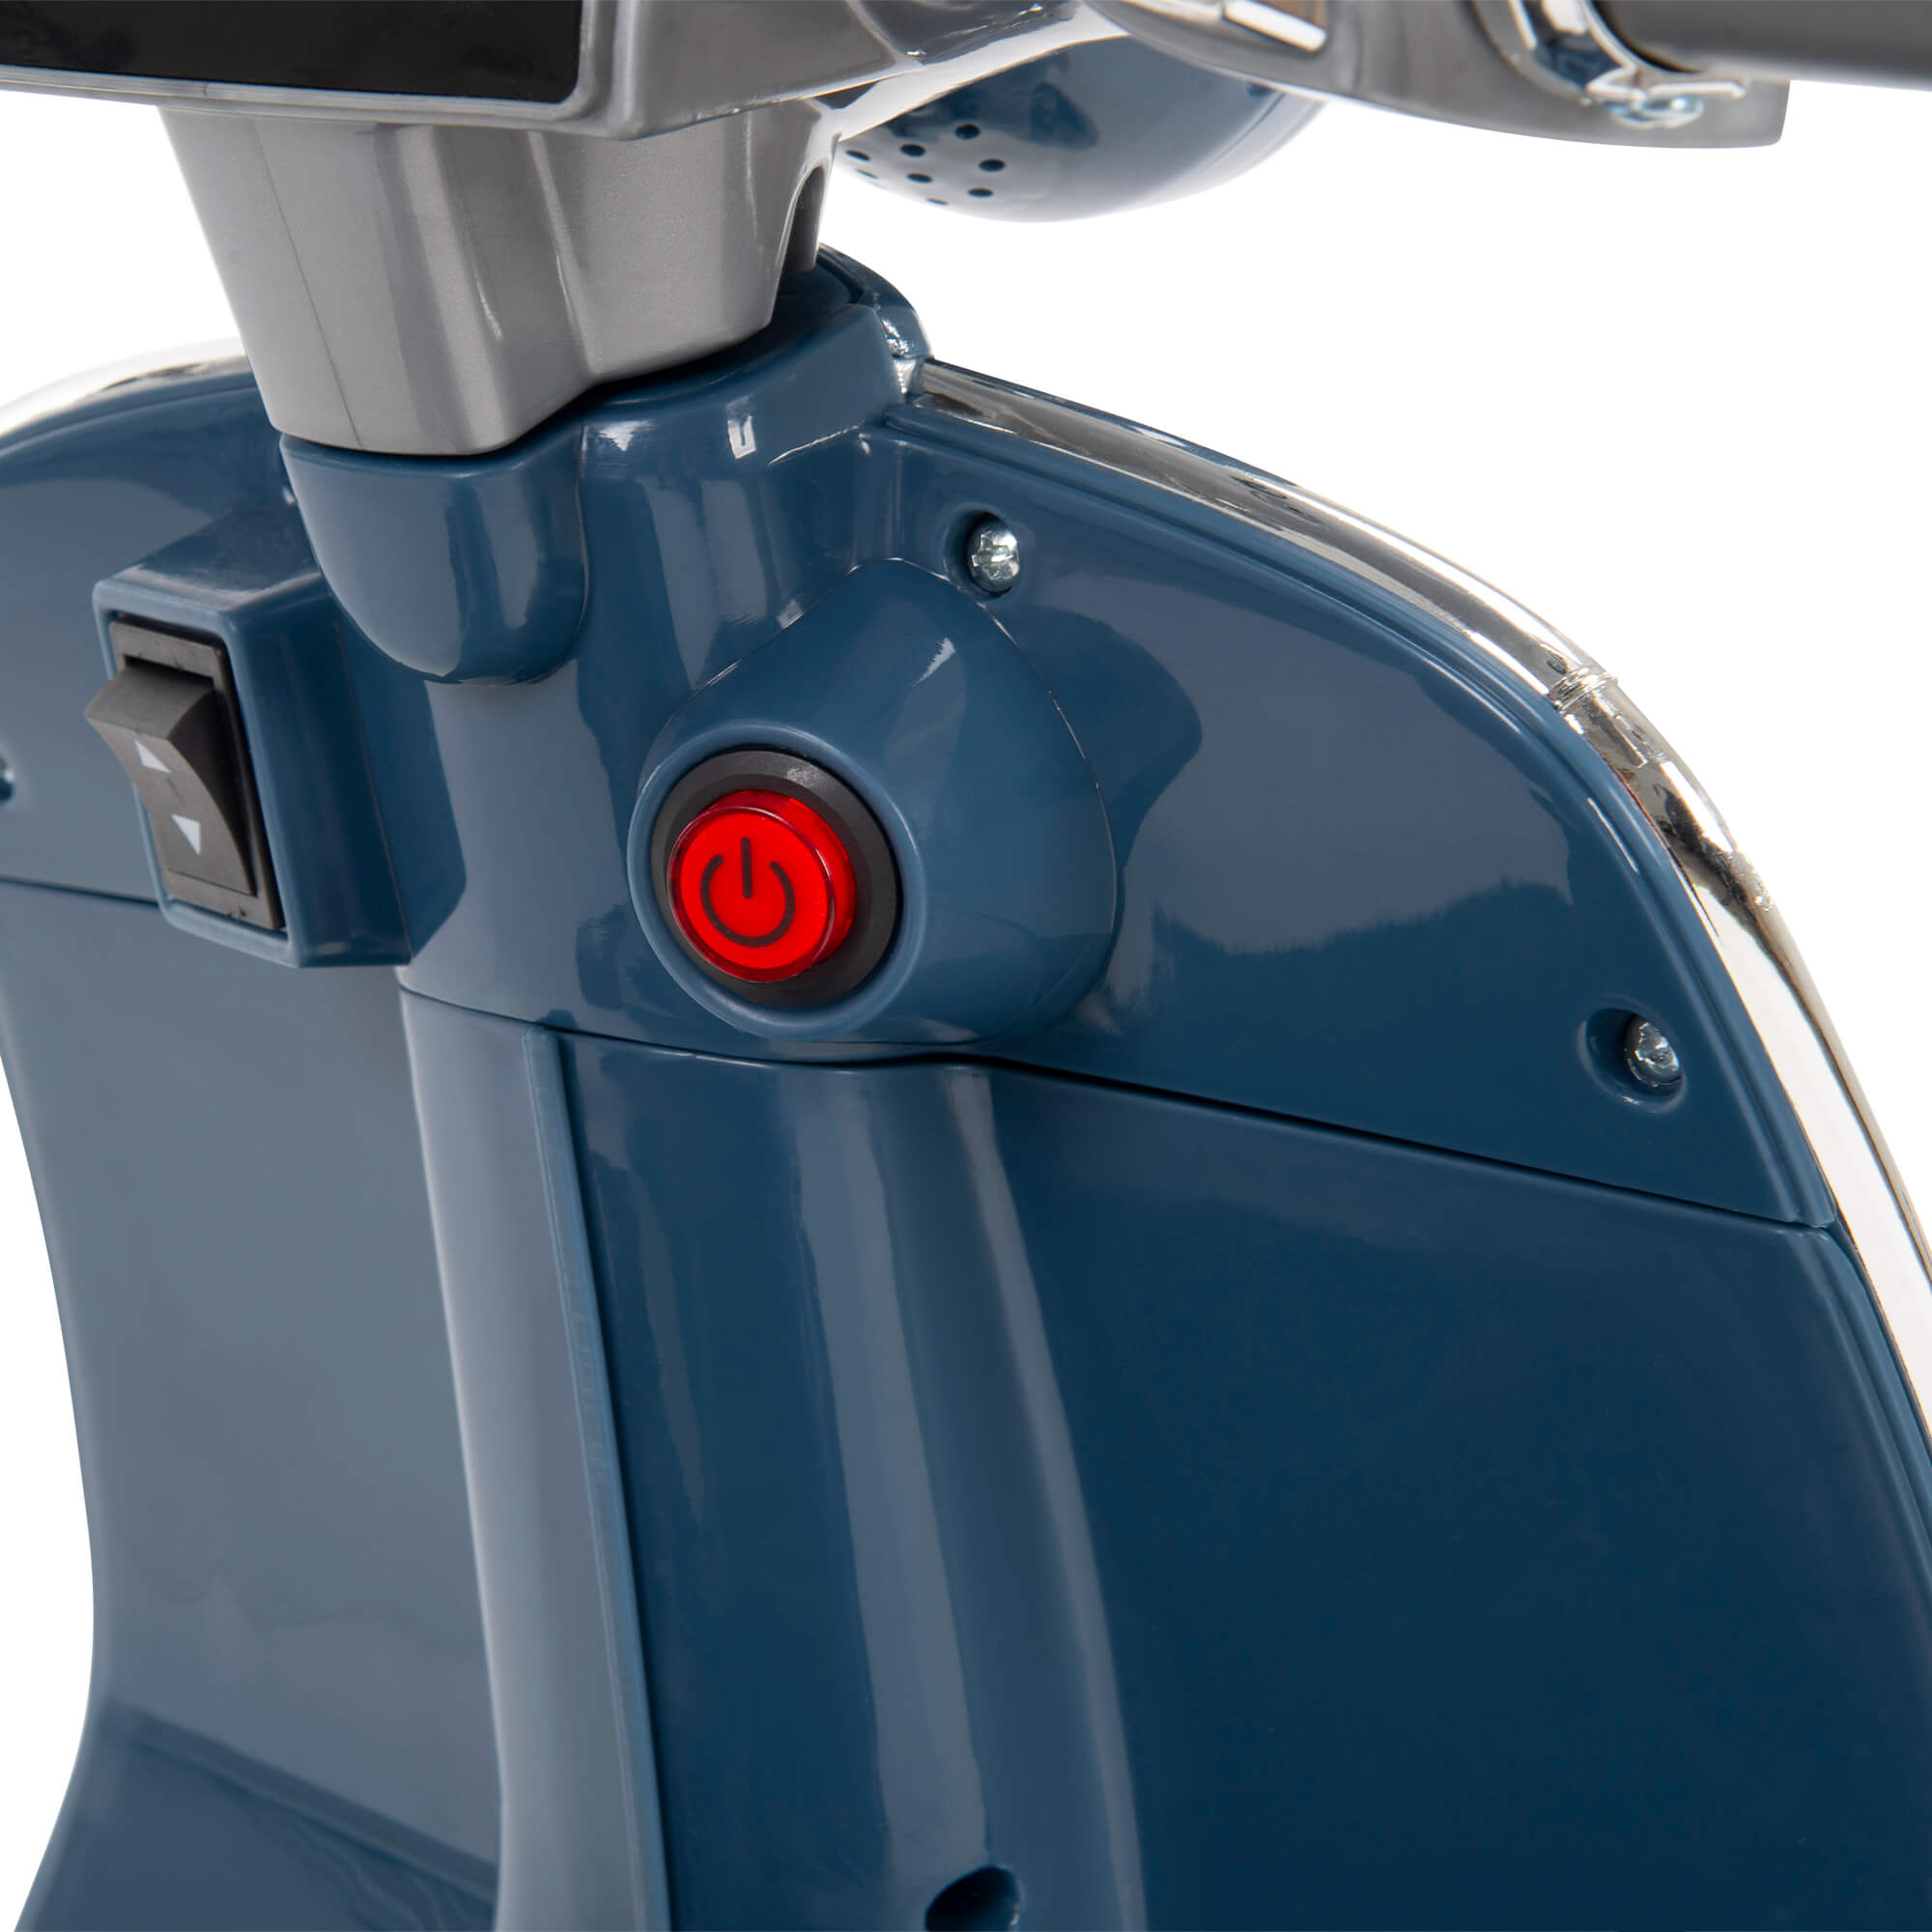 Huffy 6V Vespa Ride-On Electric Scooter for Kids, Blue - image 4 of 7